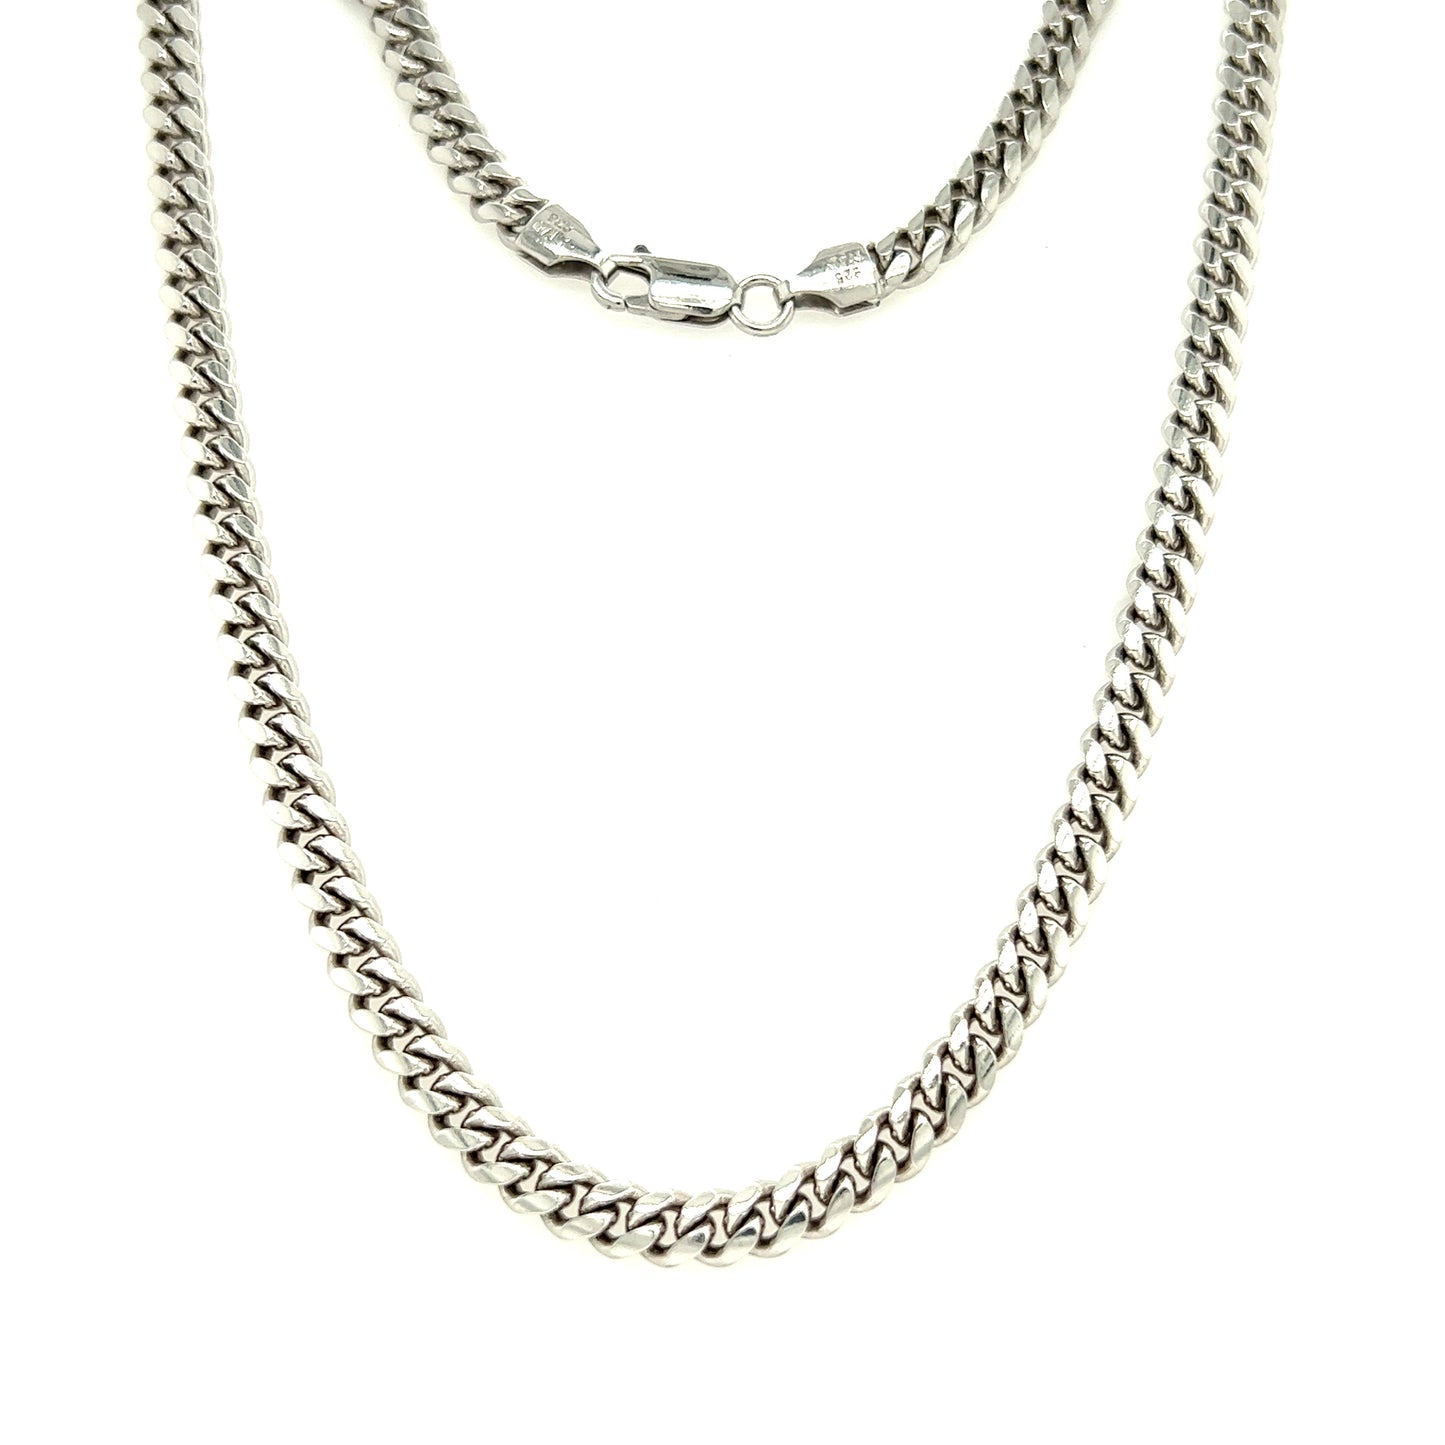 Curb Chain 4.9mm with 24in Length in Sterling Silver Full Necklace